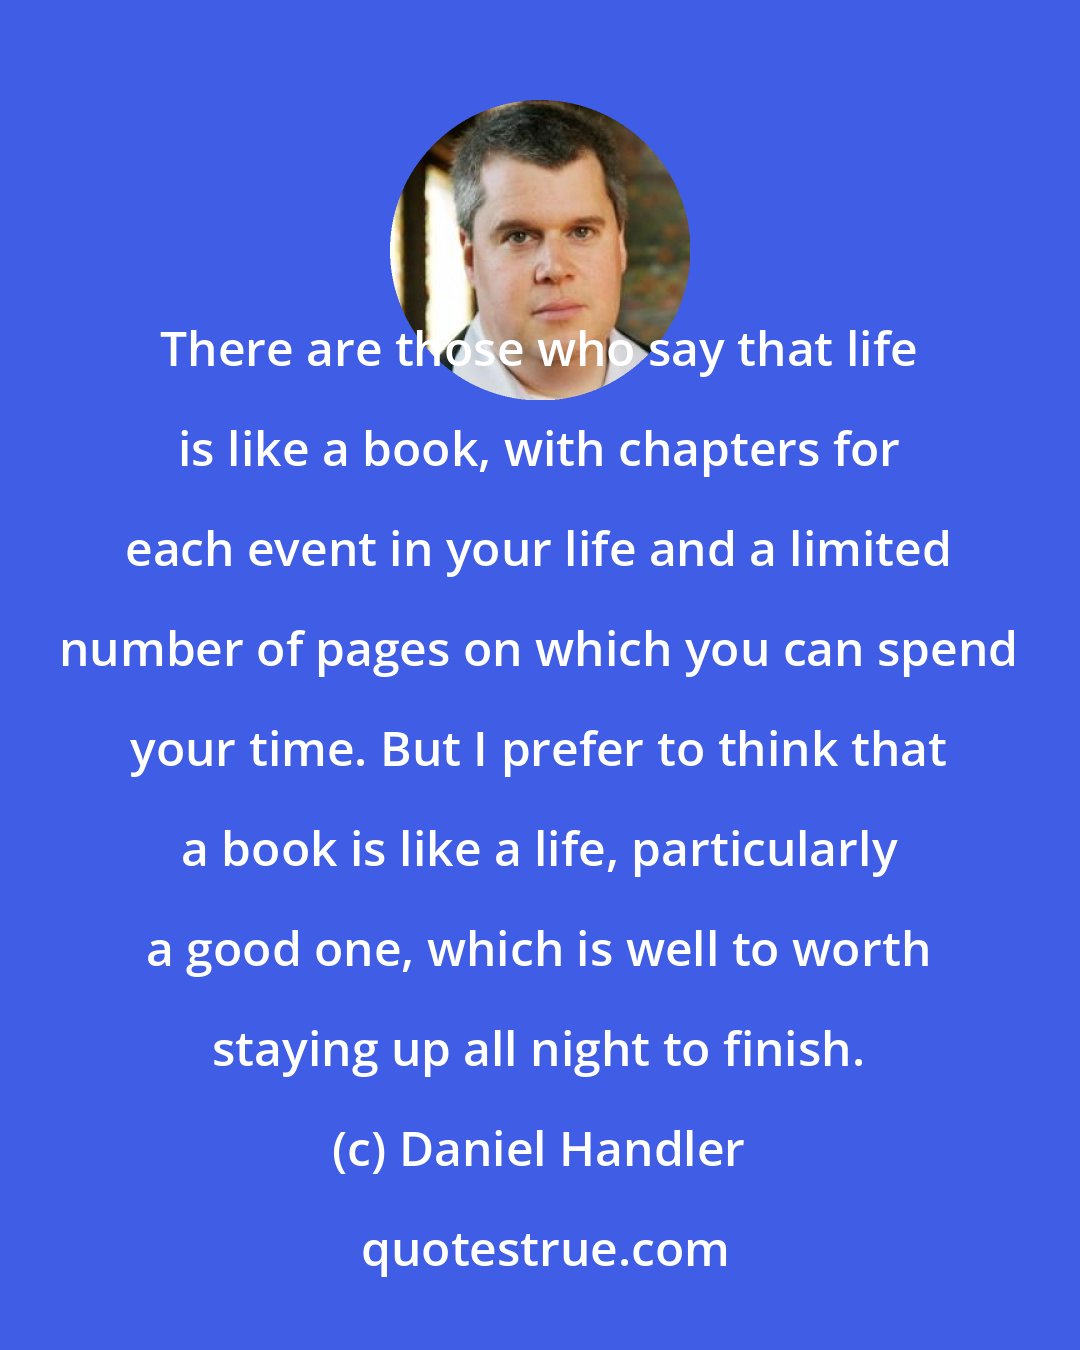 Daniel Handler: There are those who say that life is like a book, with chapters for each event in your life and a limited number of pages on which you can spend your time. But I prefer to think that a book is like a life, particularly a good one, which is well to worth staying up all night to finish.